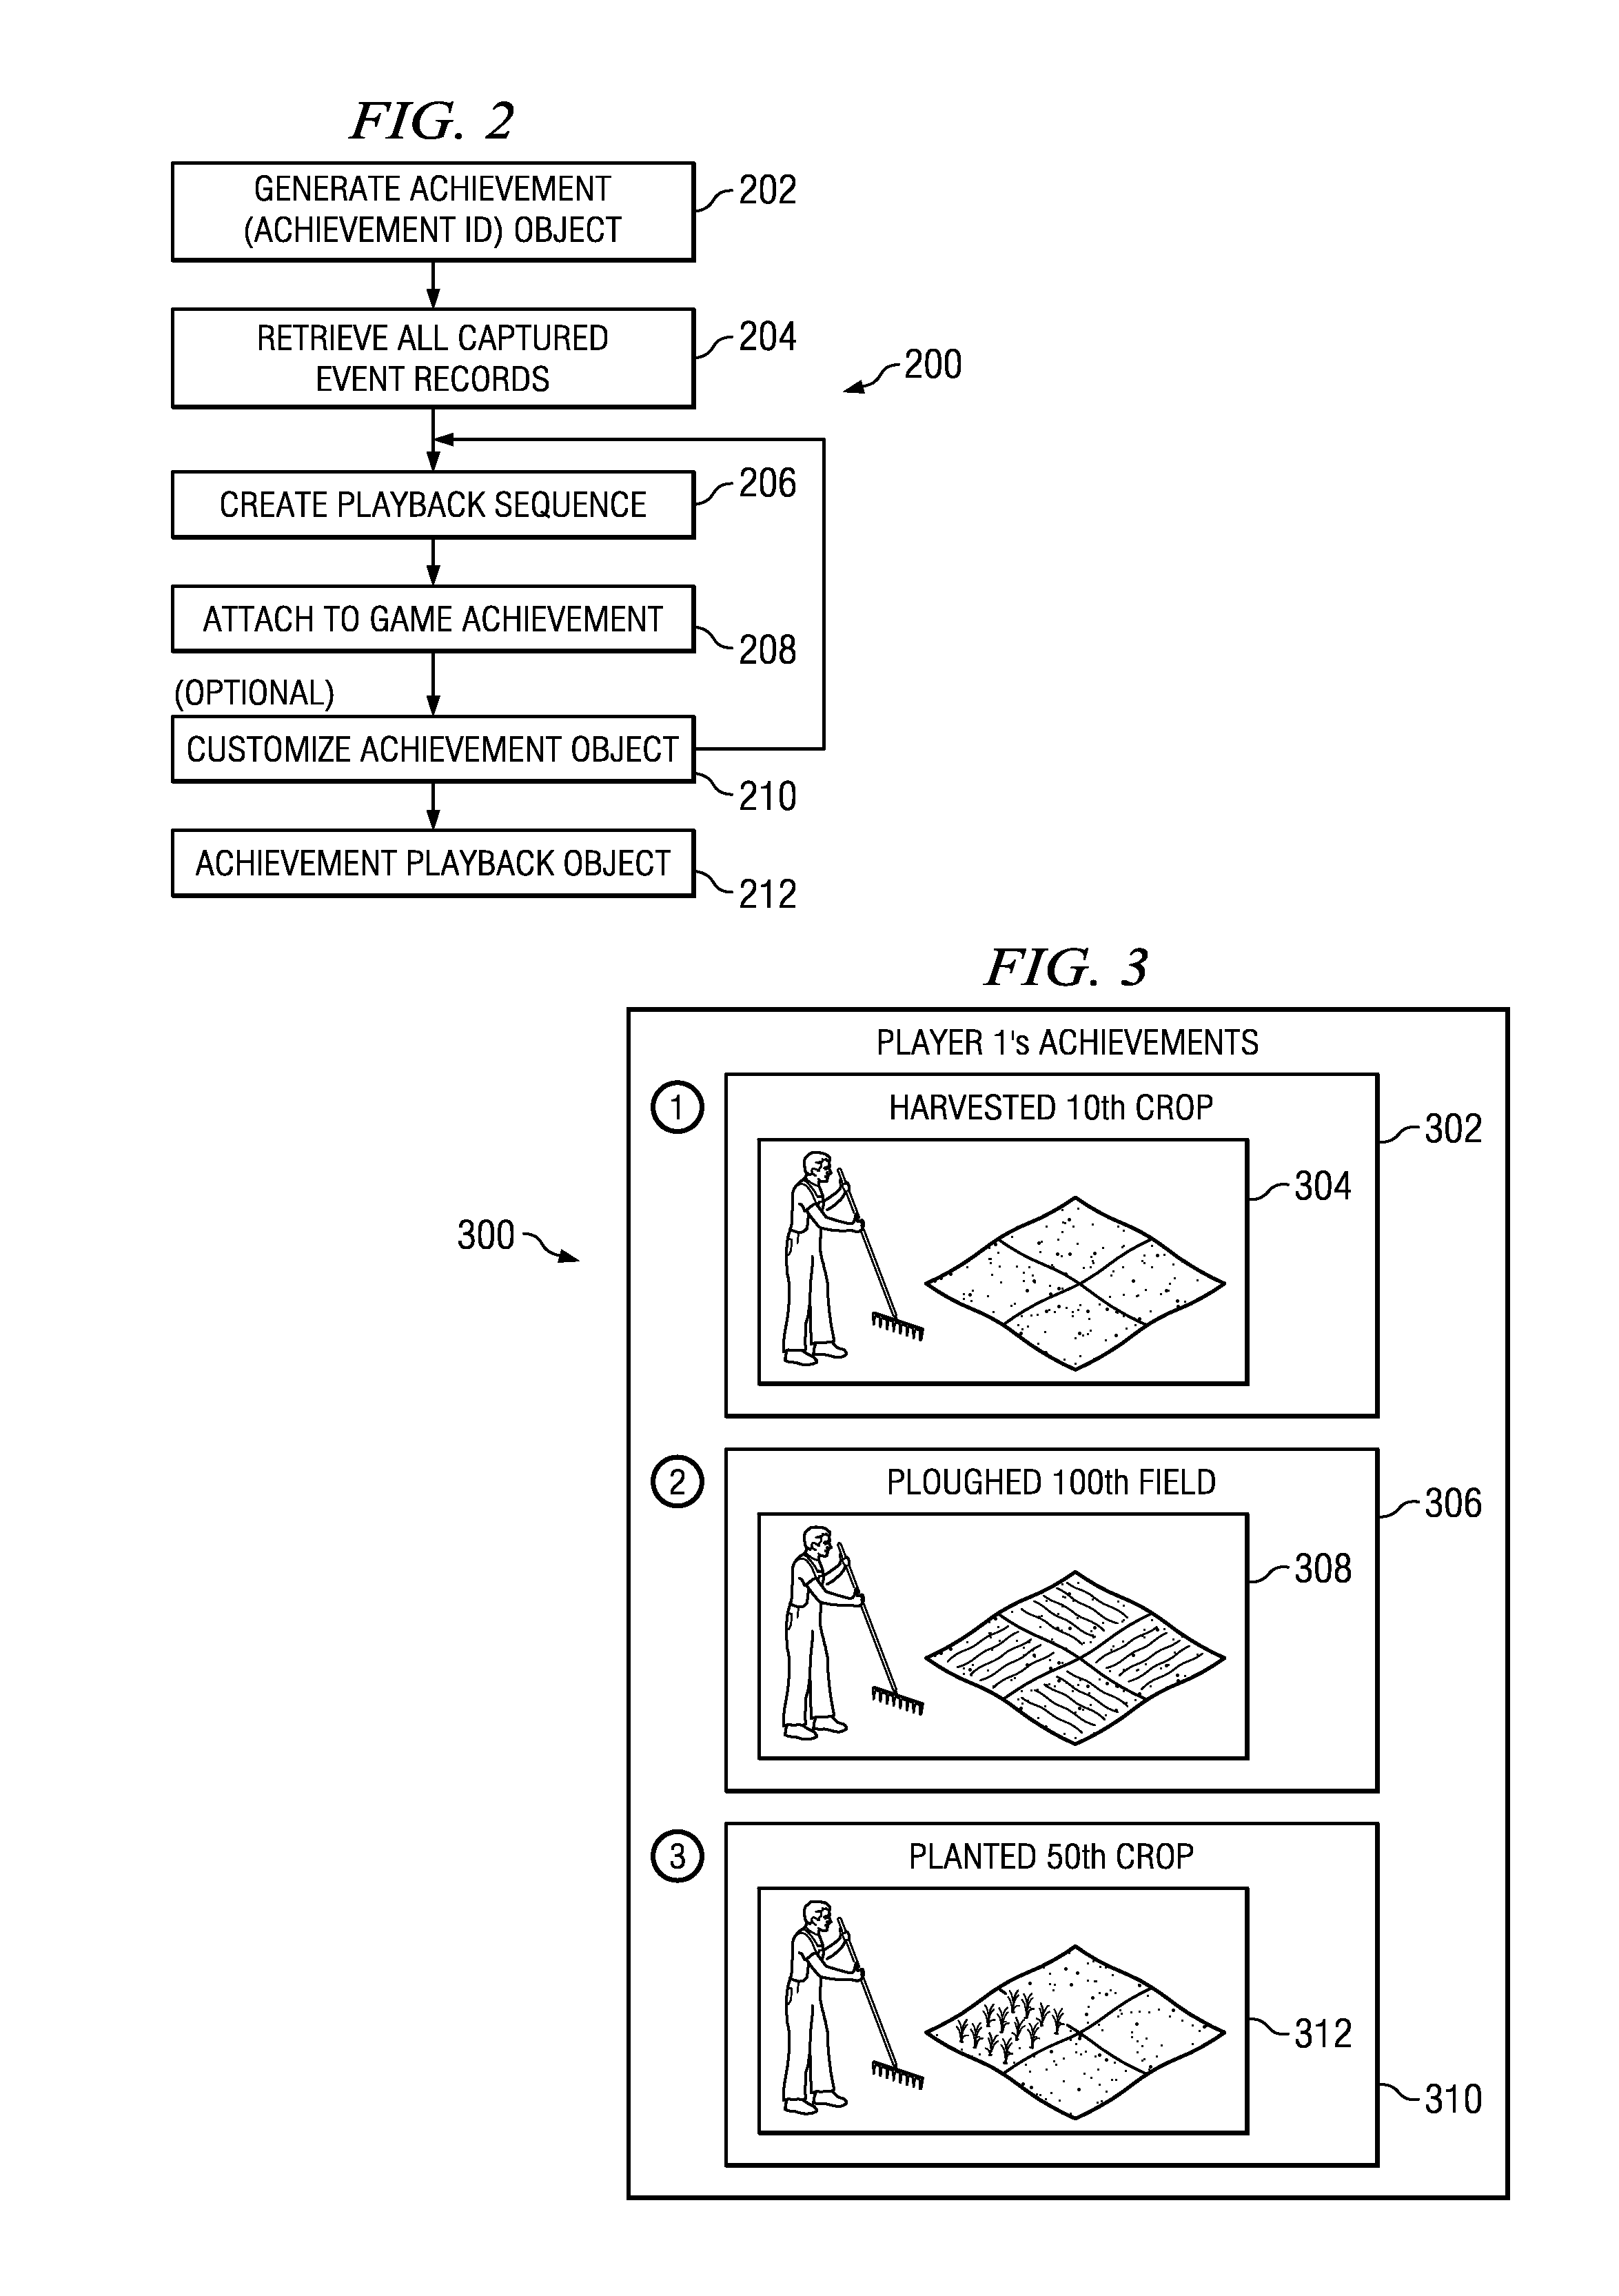 System and Method for Generating Achievement Objects Encapsulating Captured Event Playback